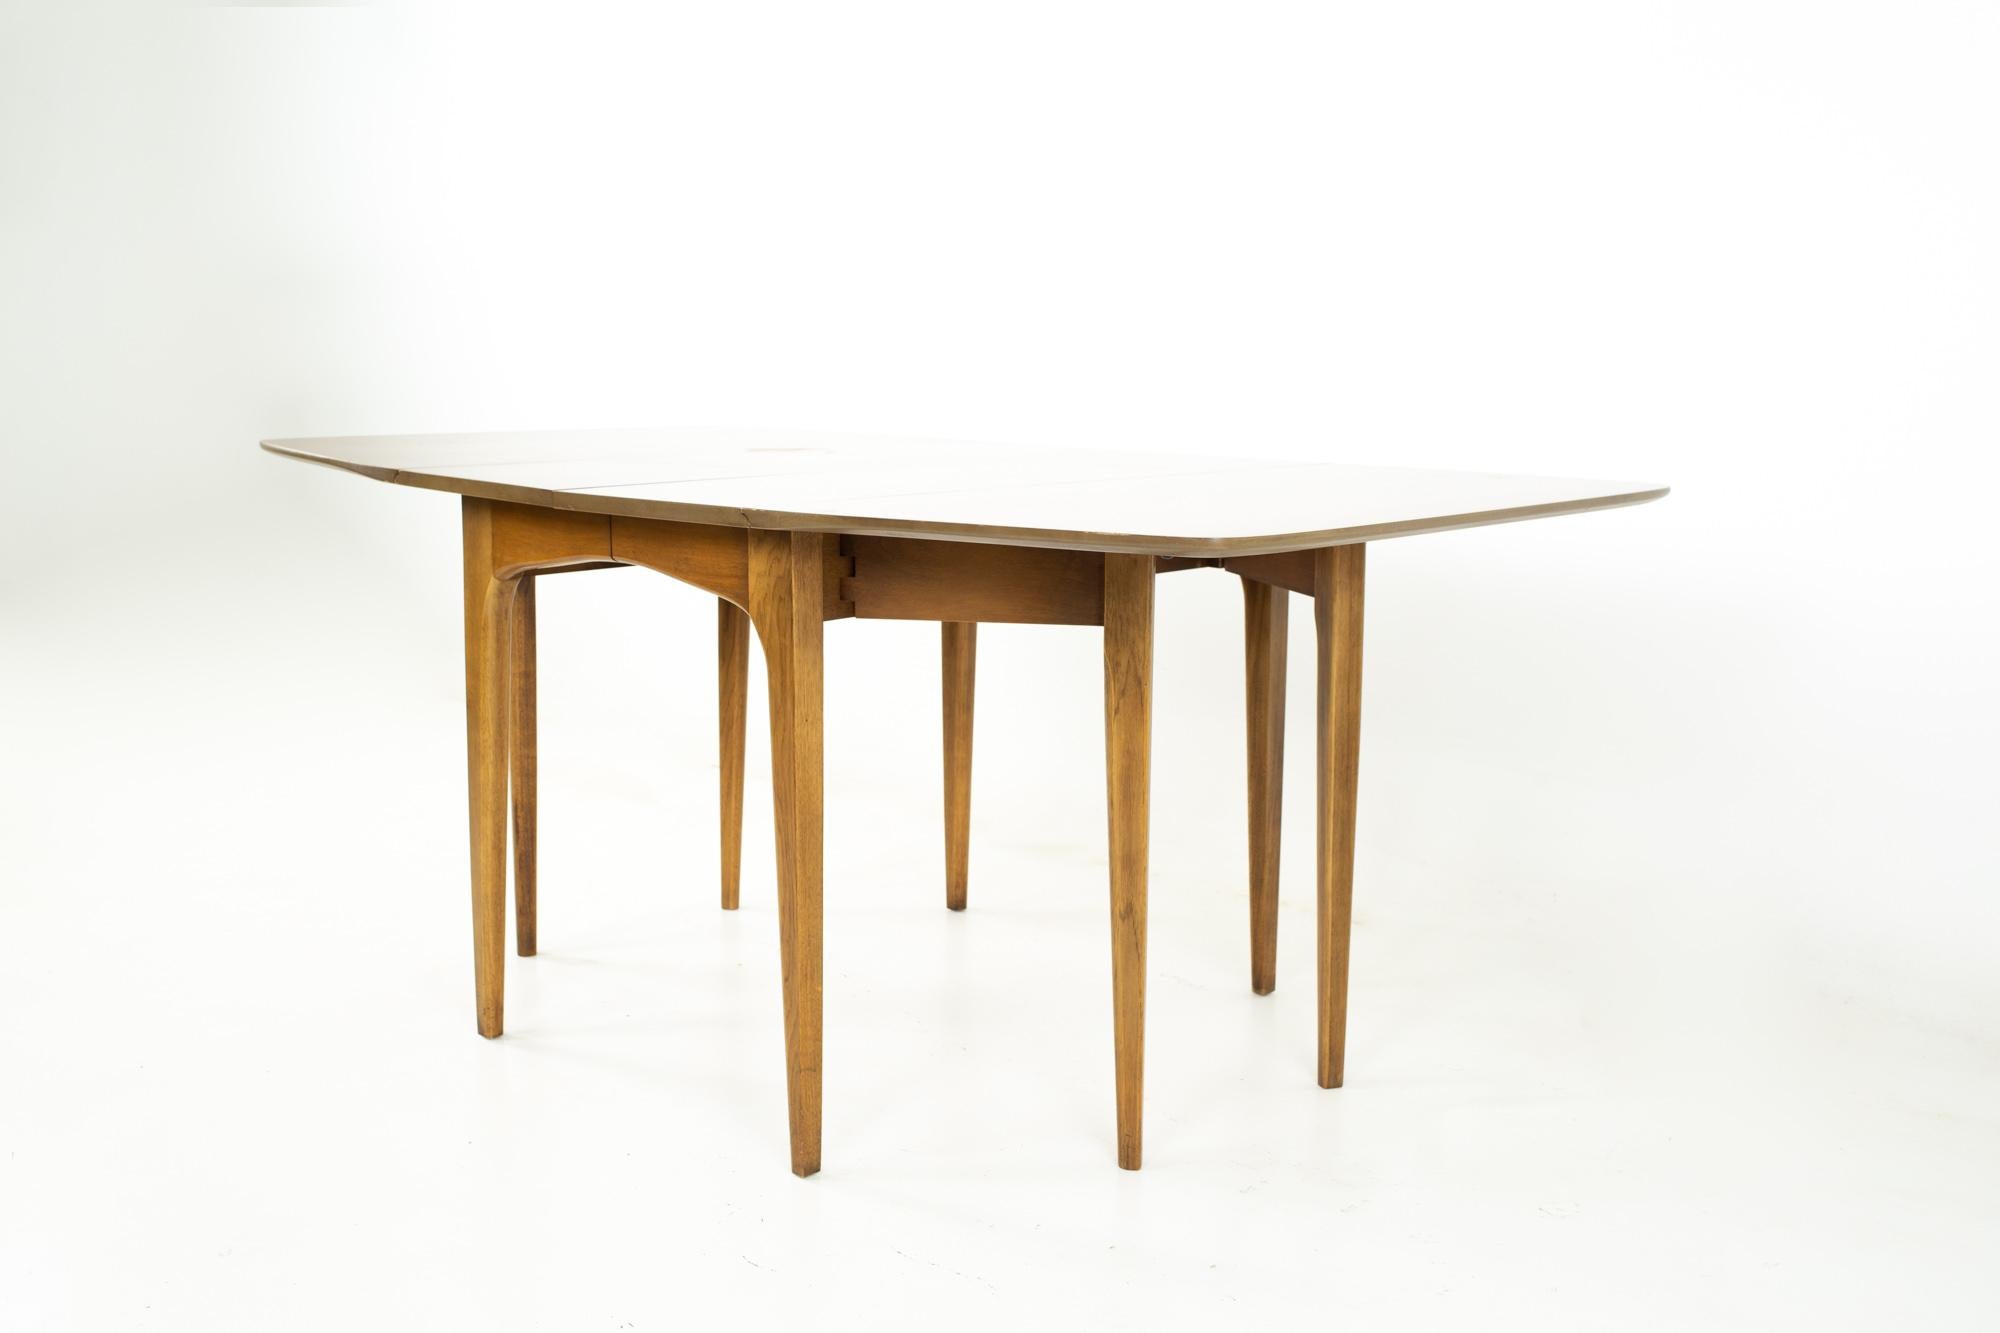 Mid century walnut surfboard drop leaf dining table
Table measures: 70 wide x 42 deep x 30 inches high, with a chair clearance of 26 inches 

All pieces of furniture can be had in what we call restored vintage condition. That means the piece is